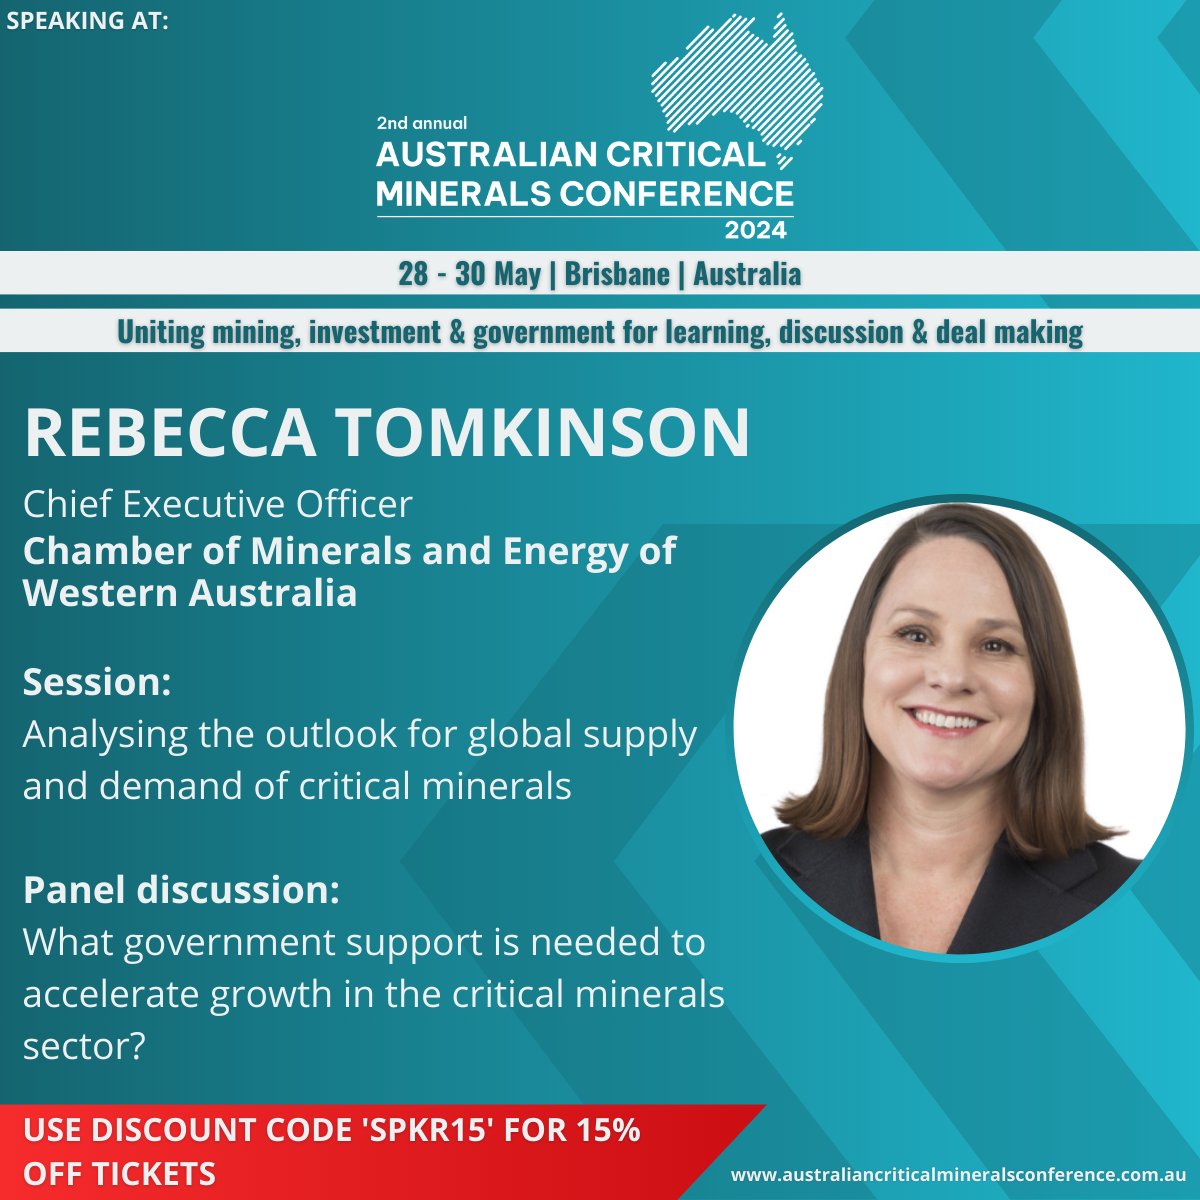 AUSTRALIAN CRITICAL MINERALS CONFERENCE 28-30th of May 2024 in Brisbane. Join us, and get 15% off your ticket with code CME15: hubs.la/Q02k-Lq10 @QuestEvents_Aus